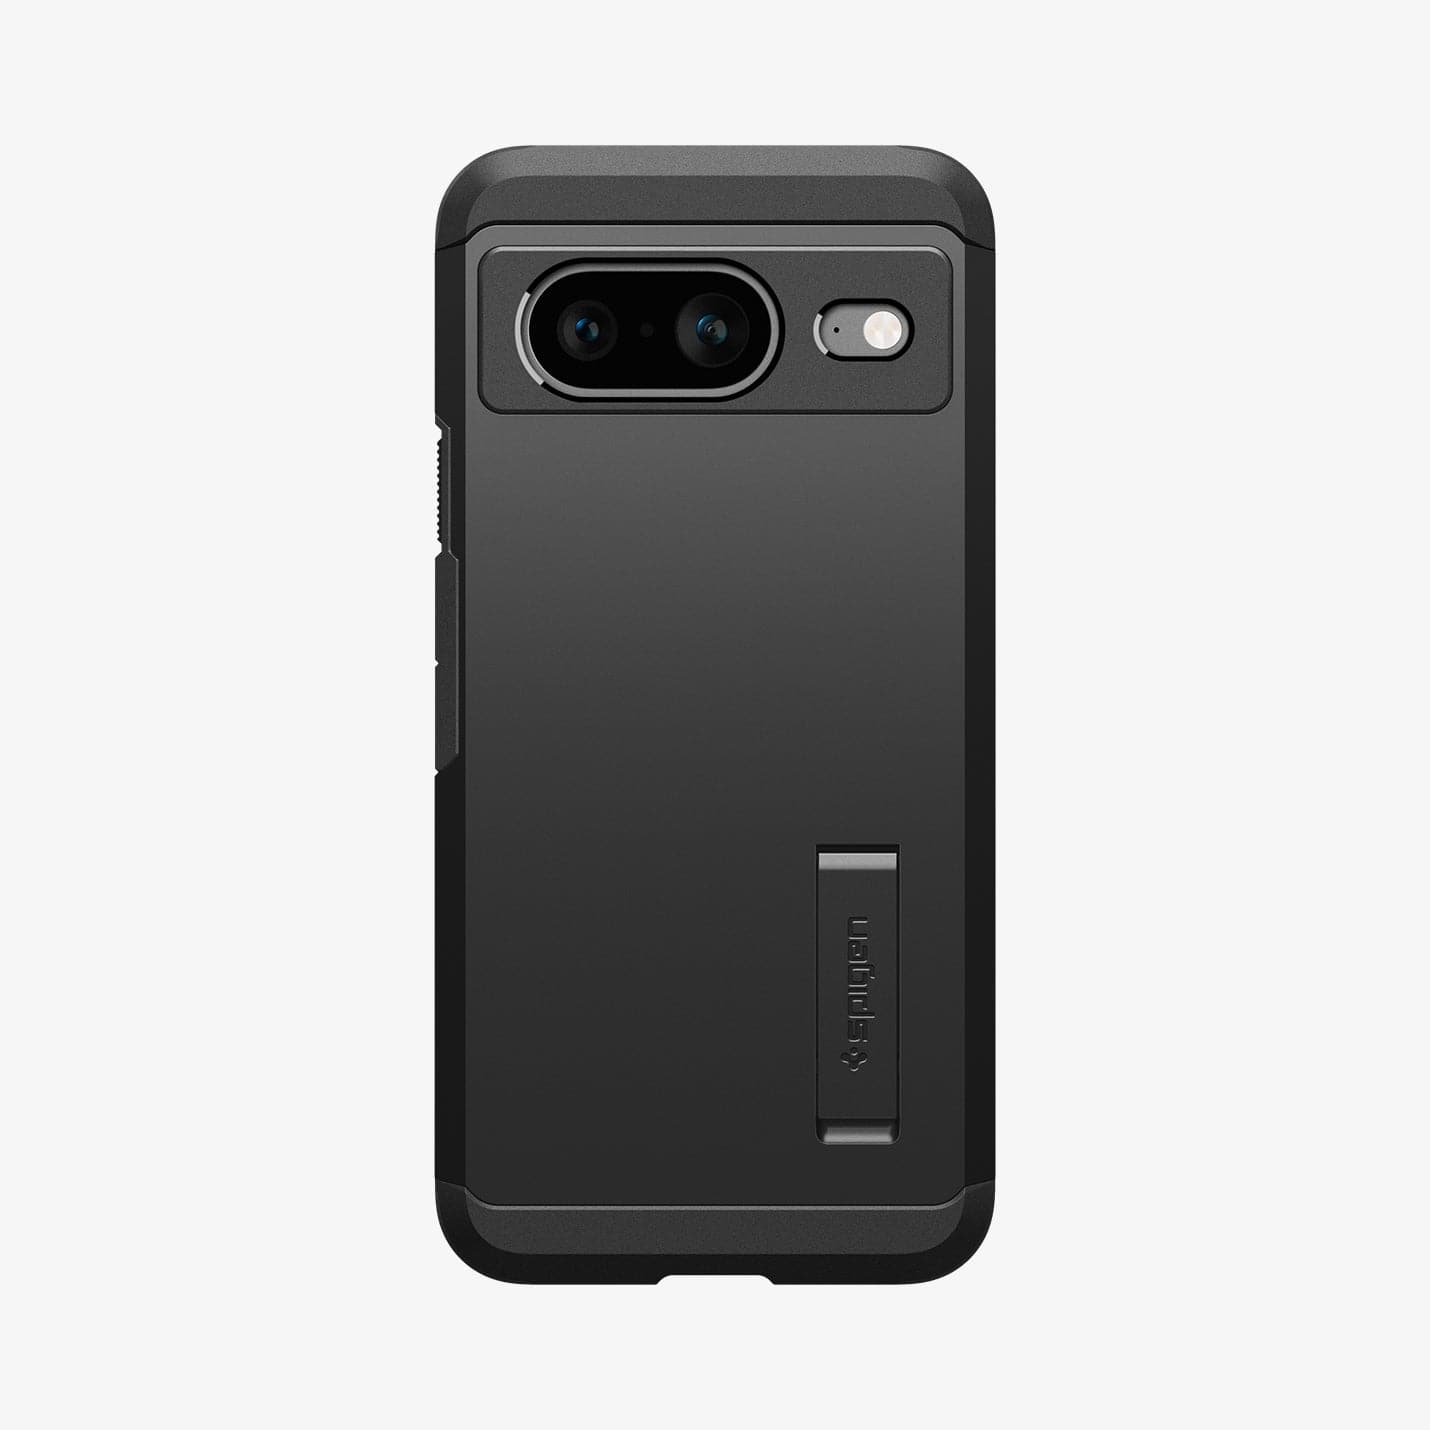 ACS06282 - Pixel 8 Case Tough Armor in black showing the back